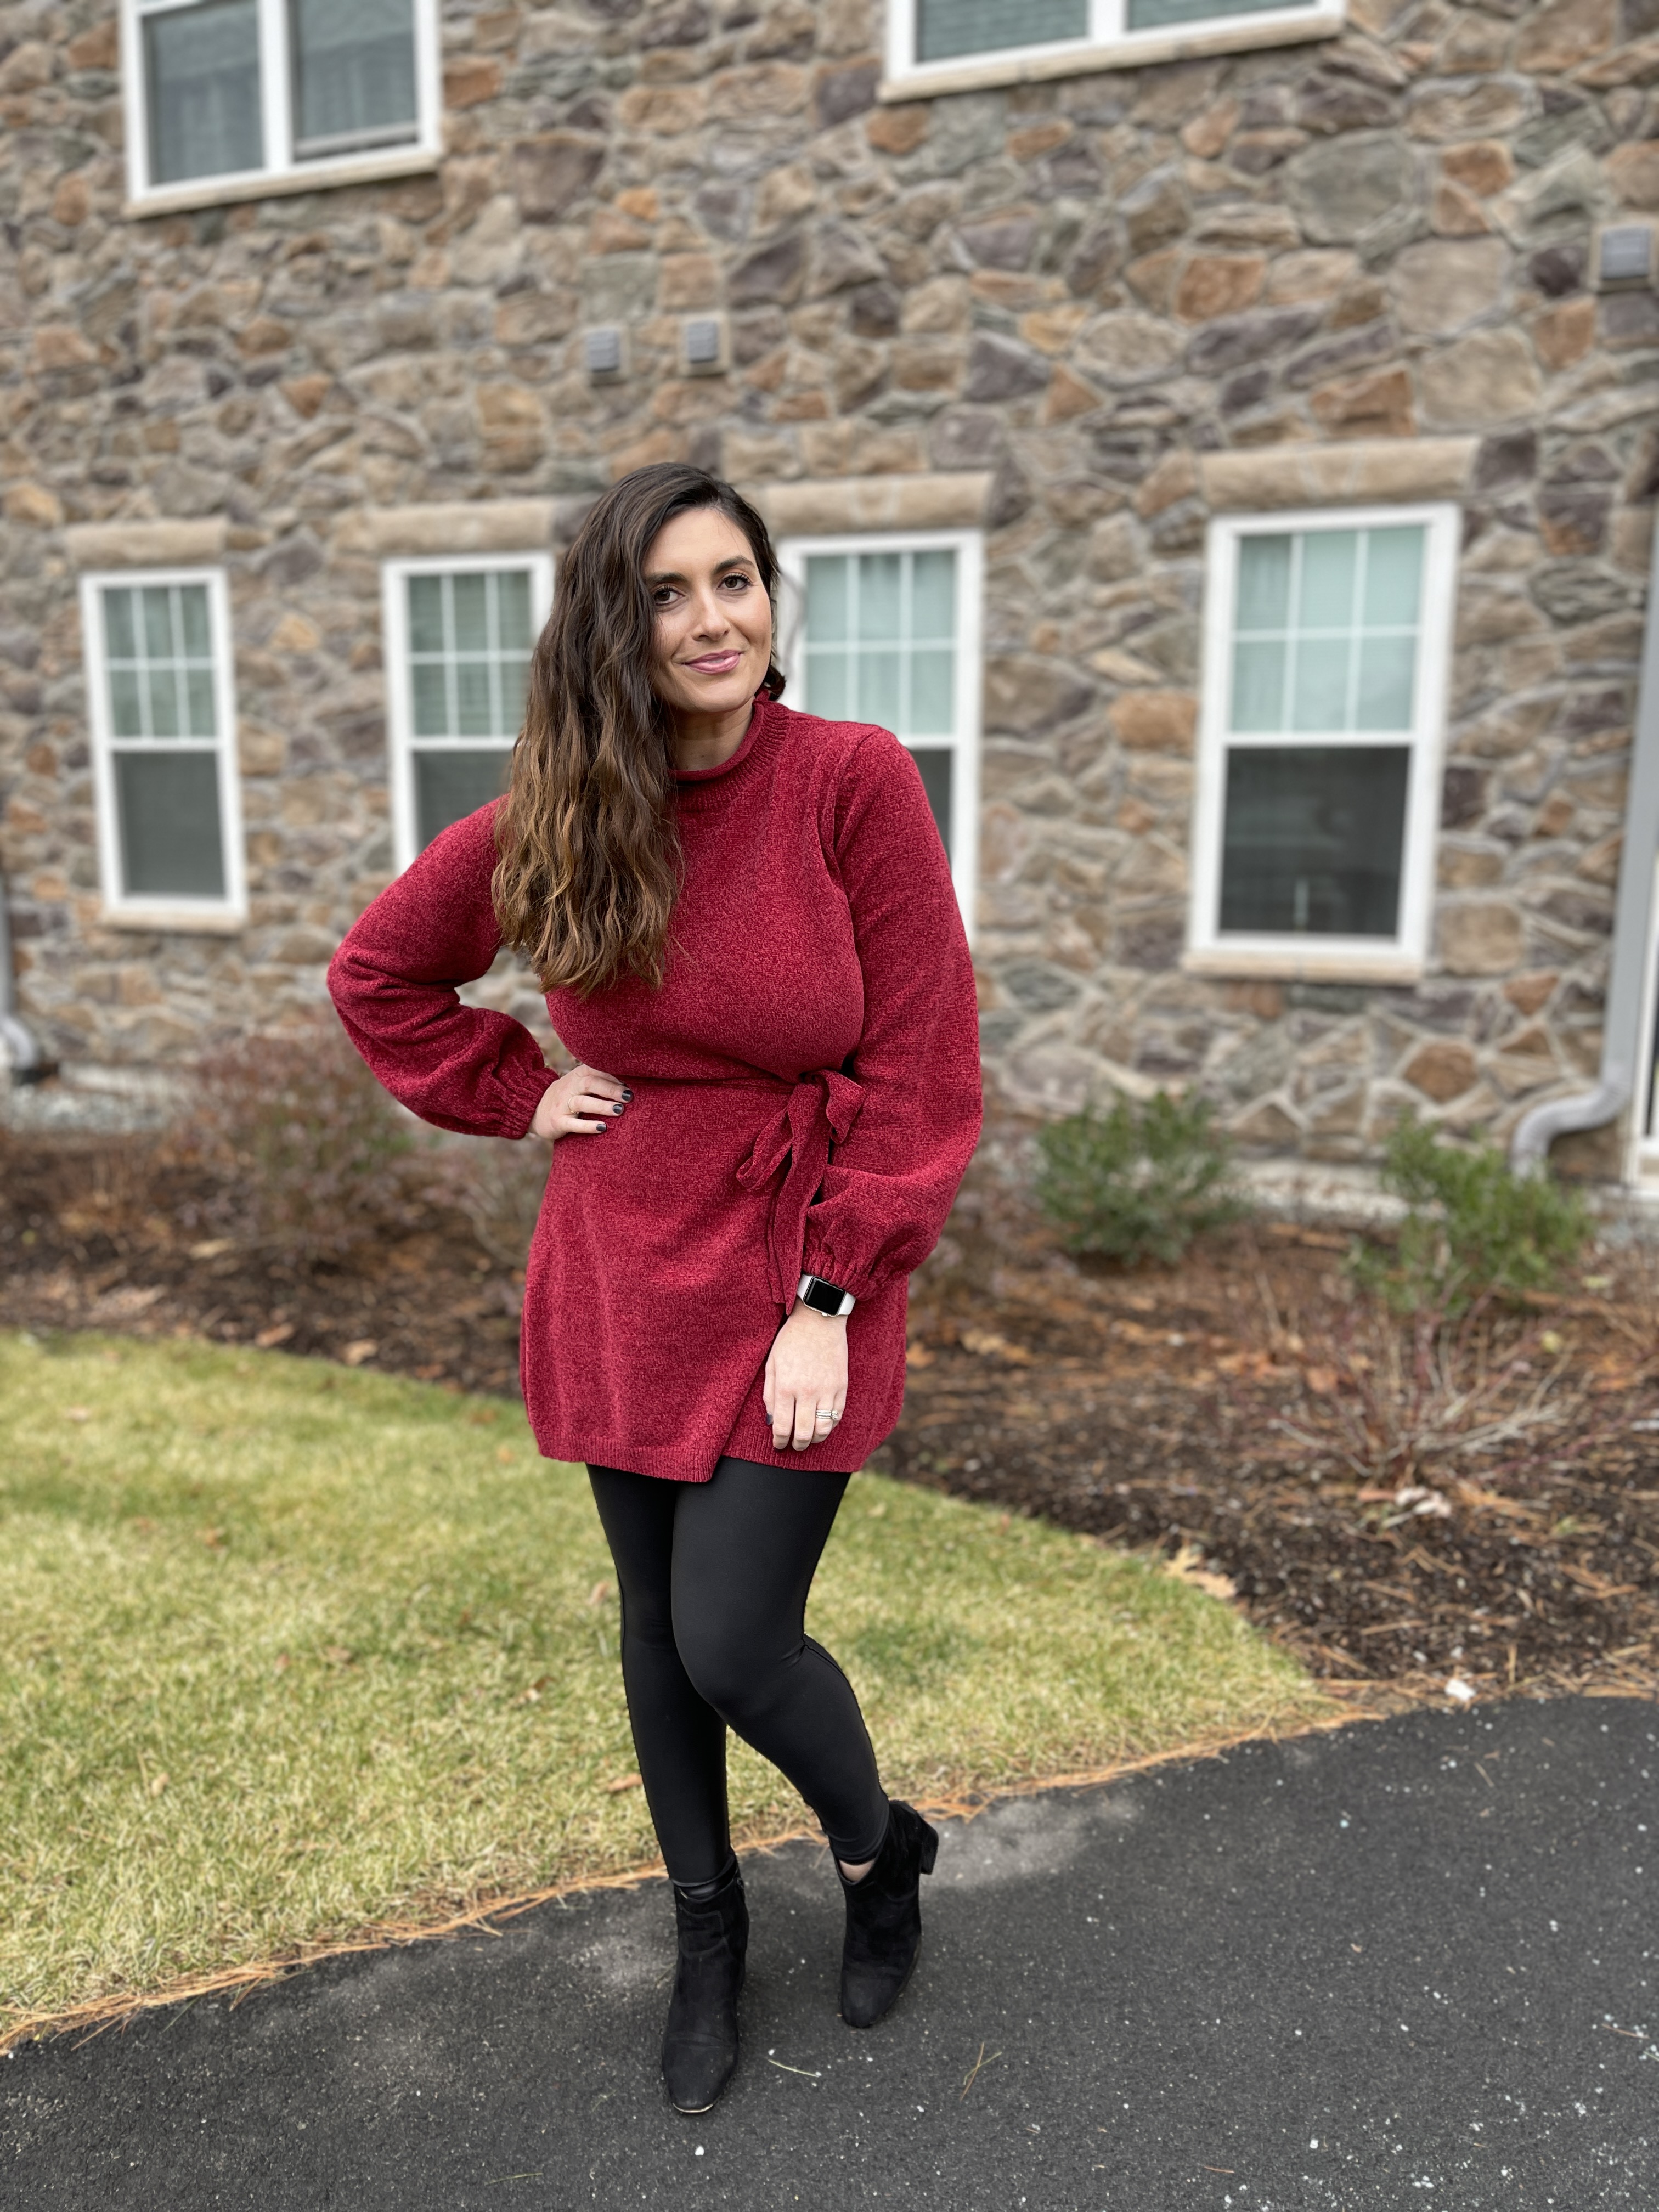 Match Made in Heaven - Loft Tall Sweater Dresses and HUE Tall Tights